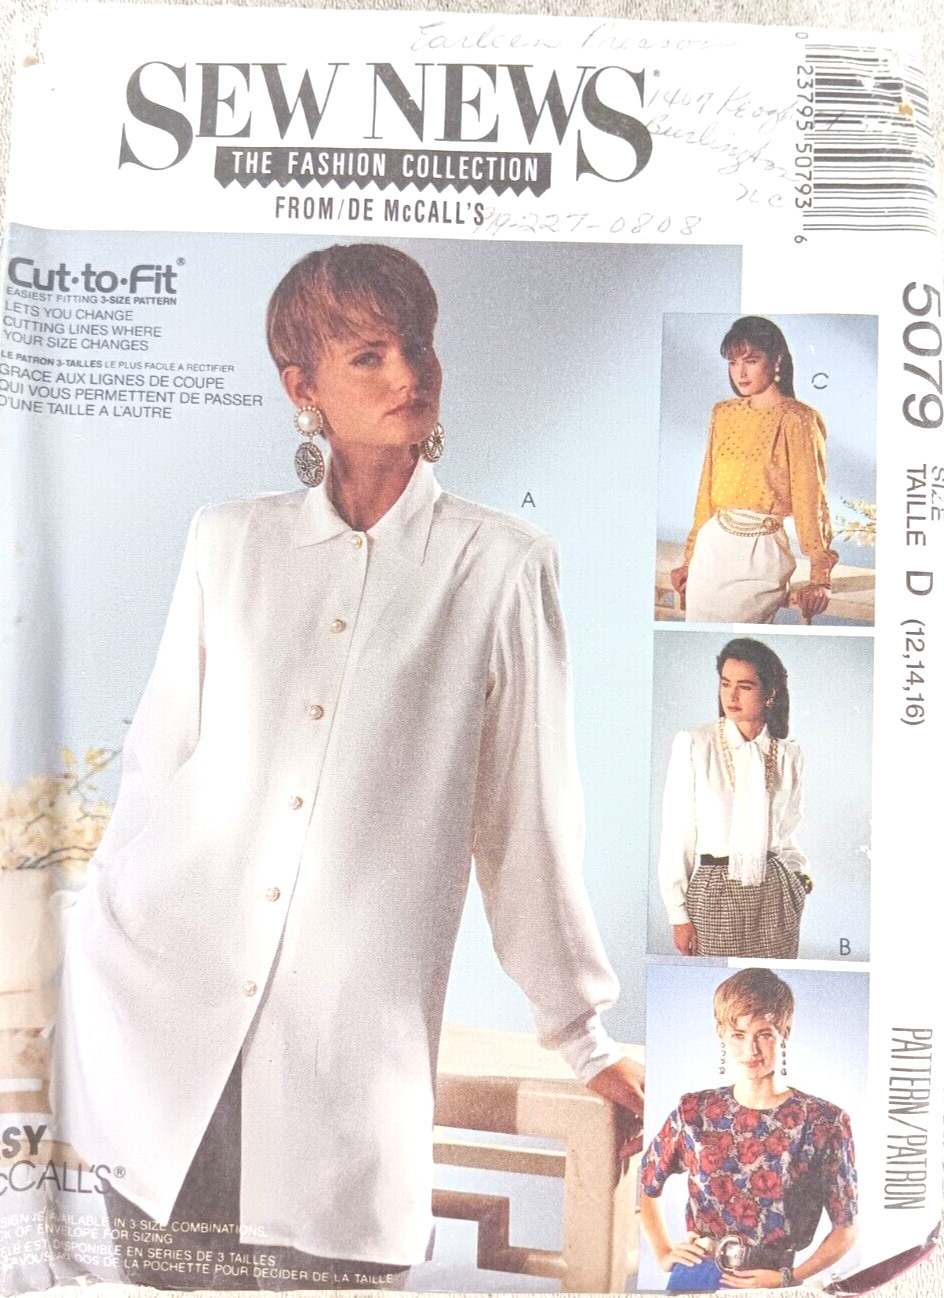 McCall\'s Pattern 5079 Easy Blouse & Scarf size 12-16 Sew News Fashion Collection